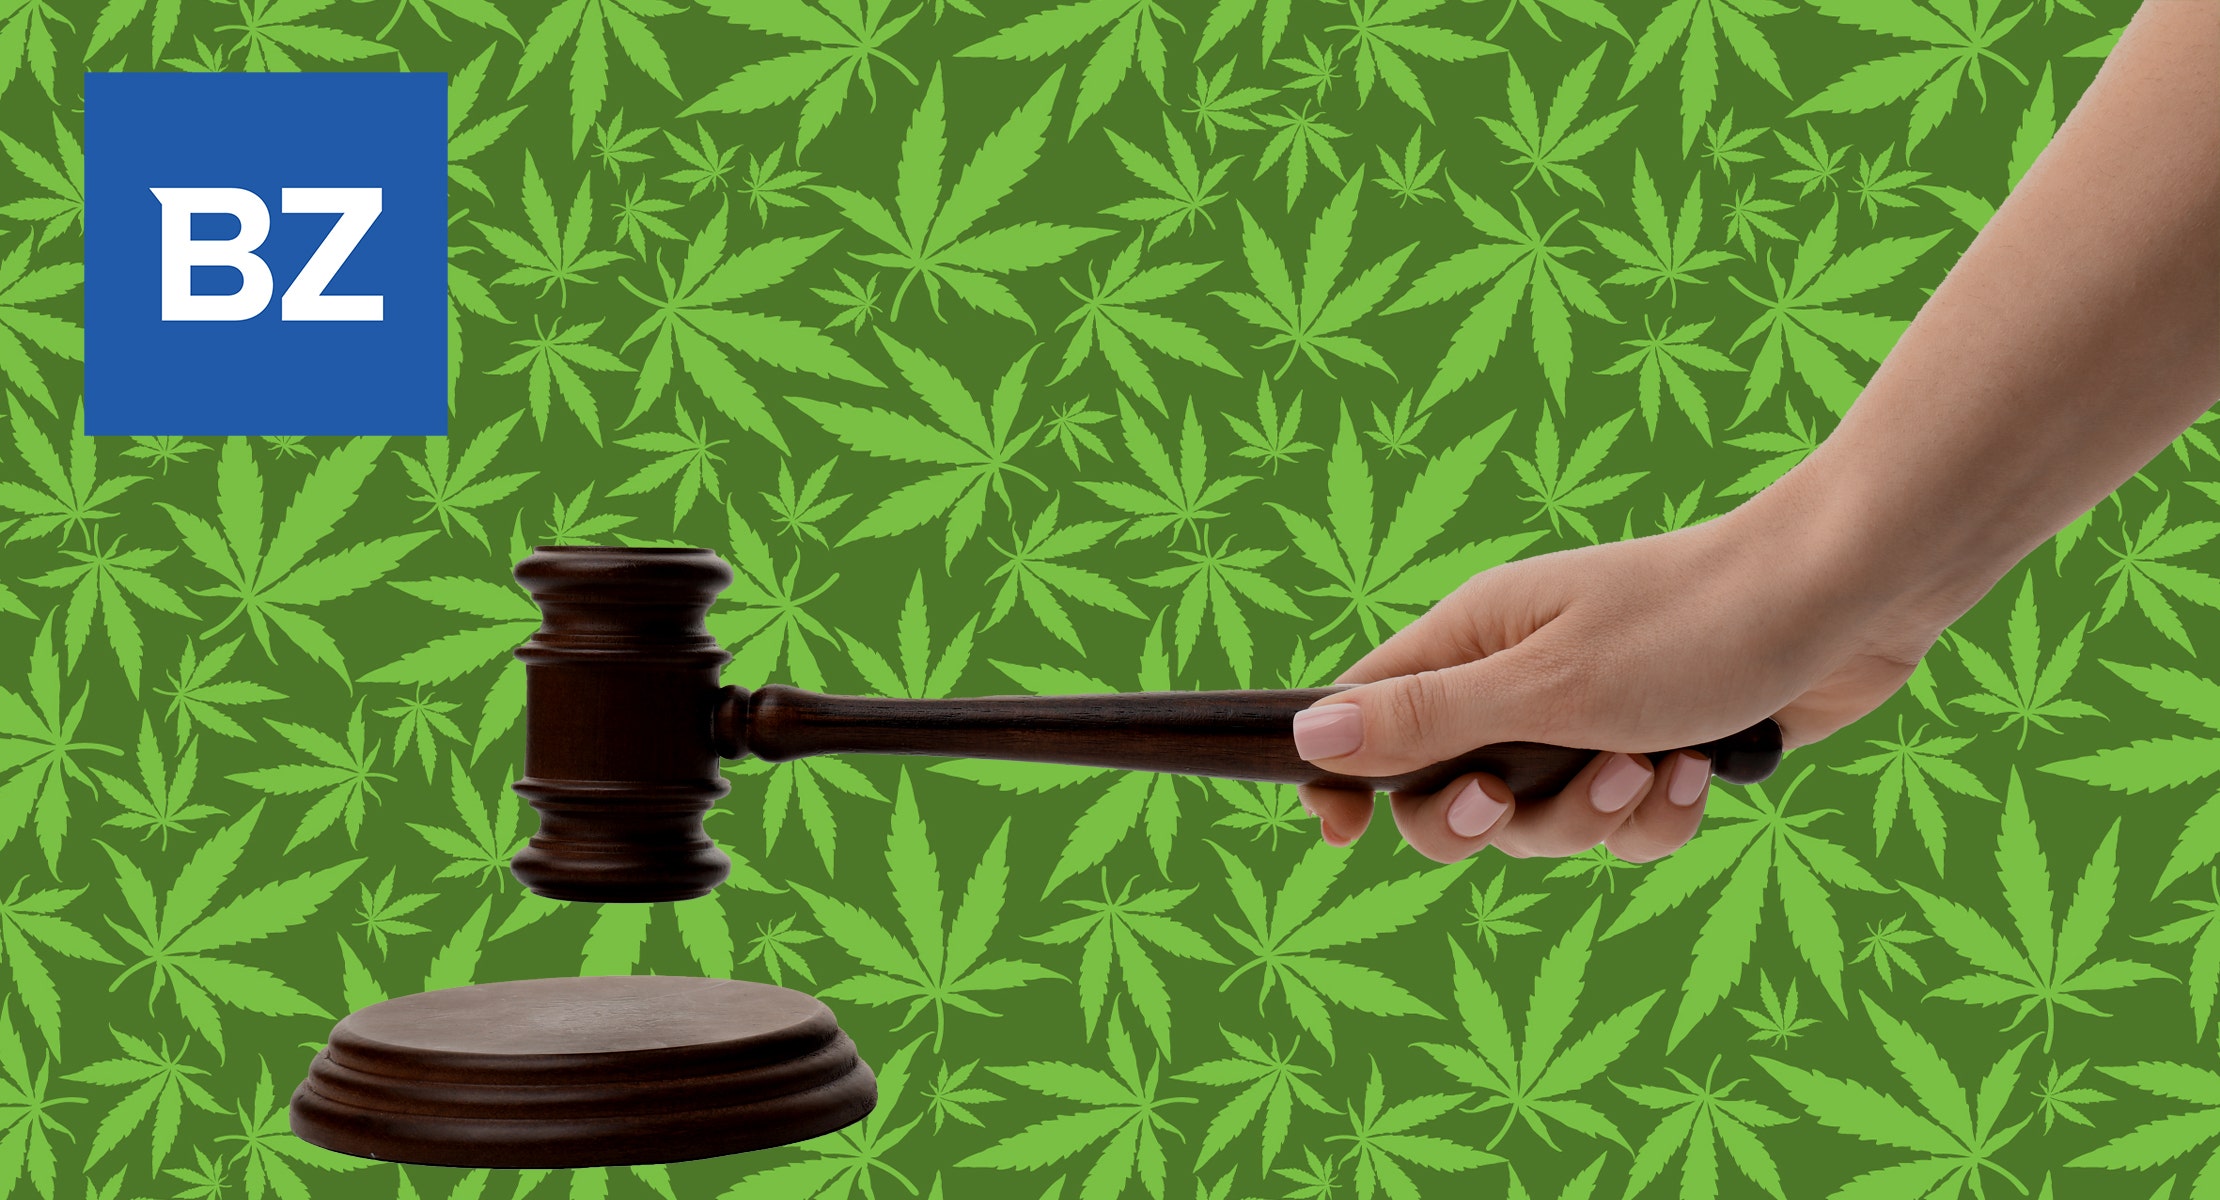 UK Cannabis Users Could Lose Passports Under New Proposed Laws, NY Awards $5M To Community Colleges For Cannabis Job Training Programs & More Reg. Updates